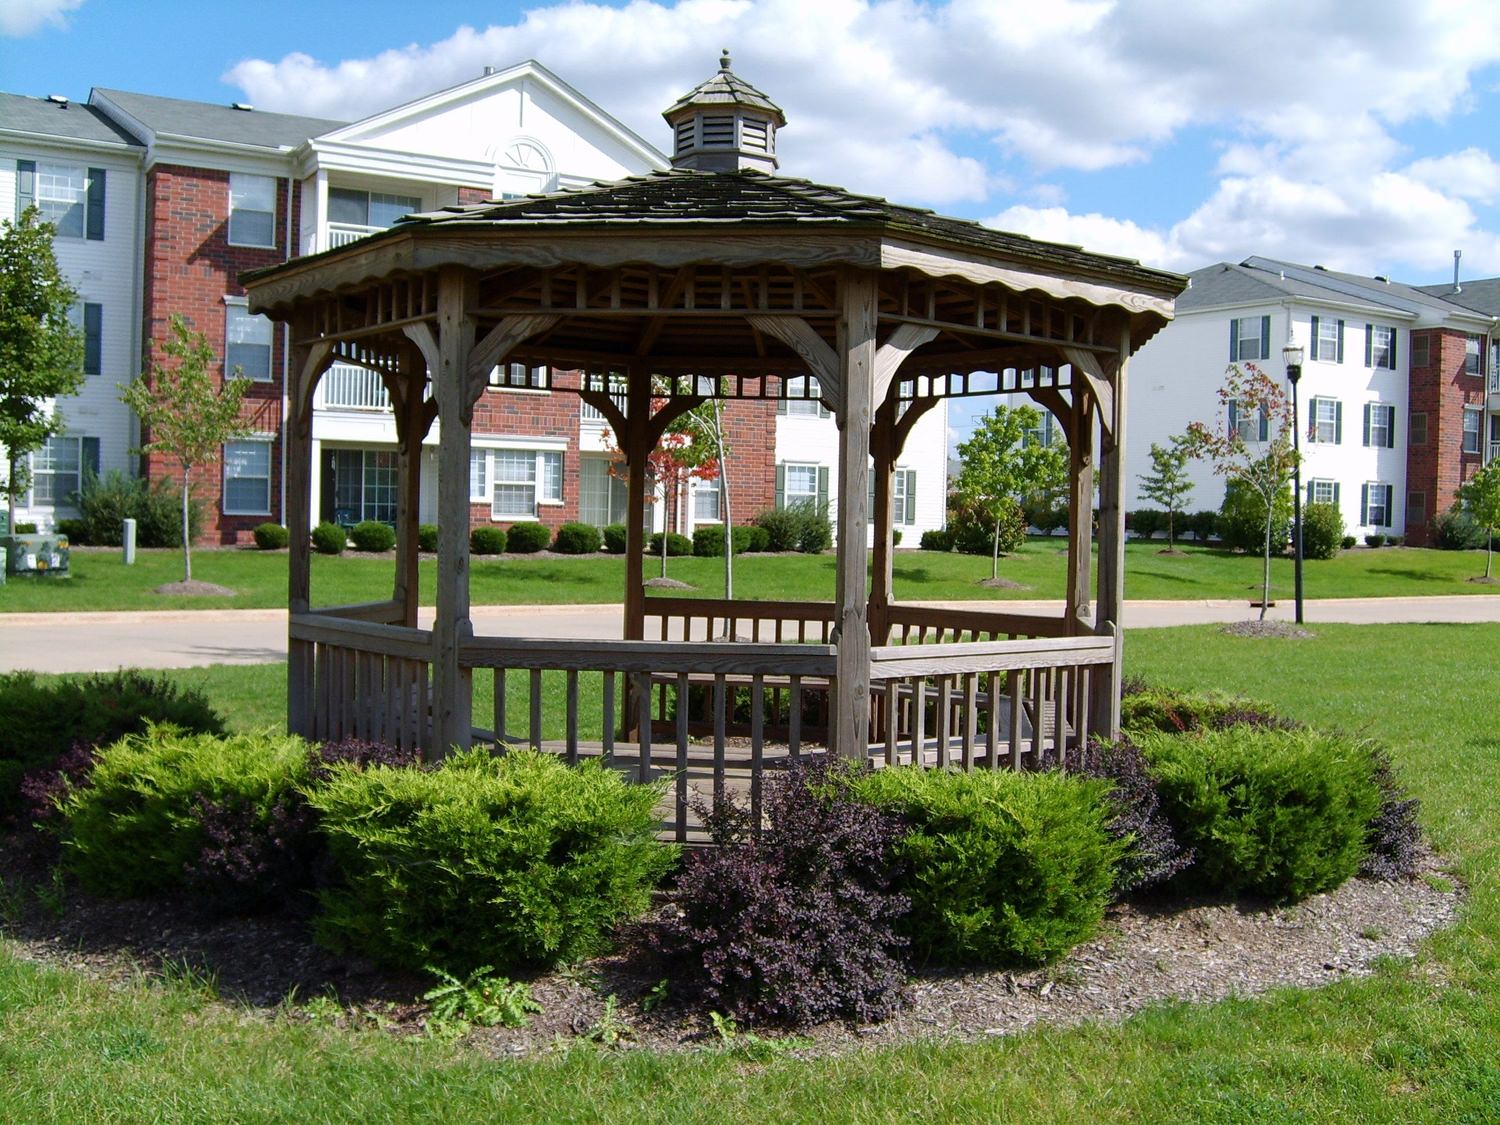 A gazebo in the middle of a park that is full of plants and trees with building in the background.